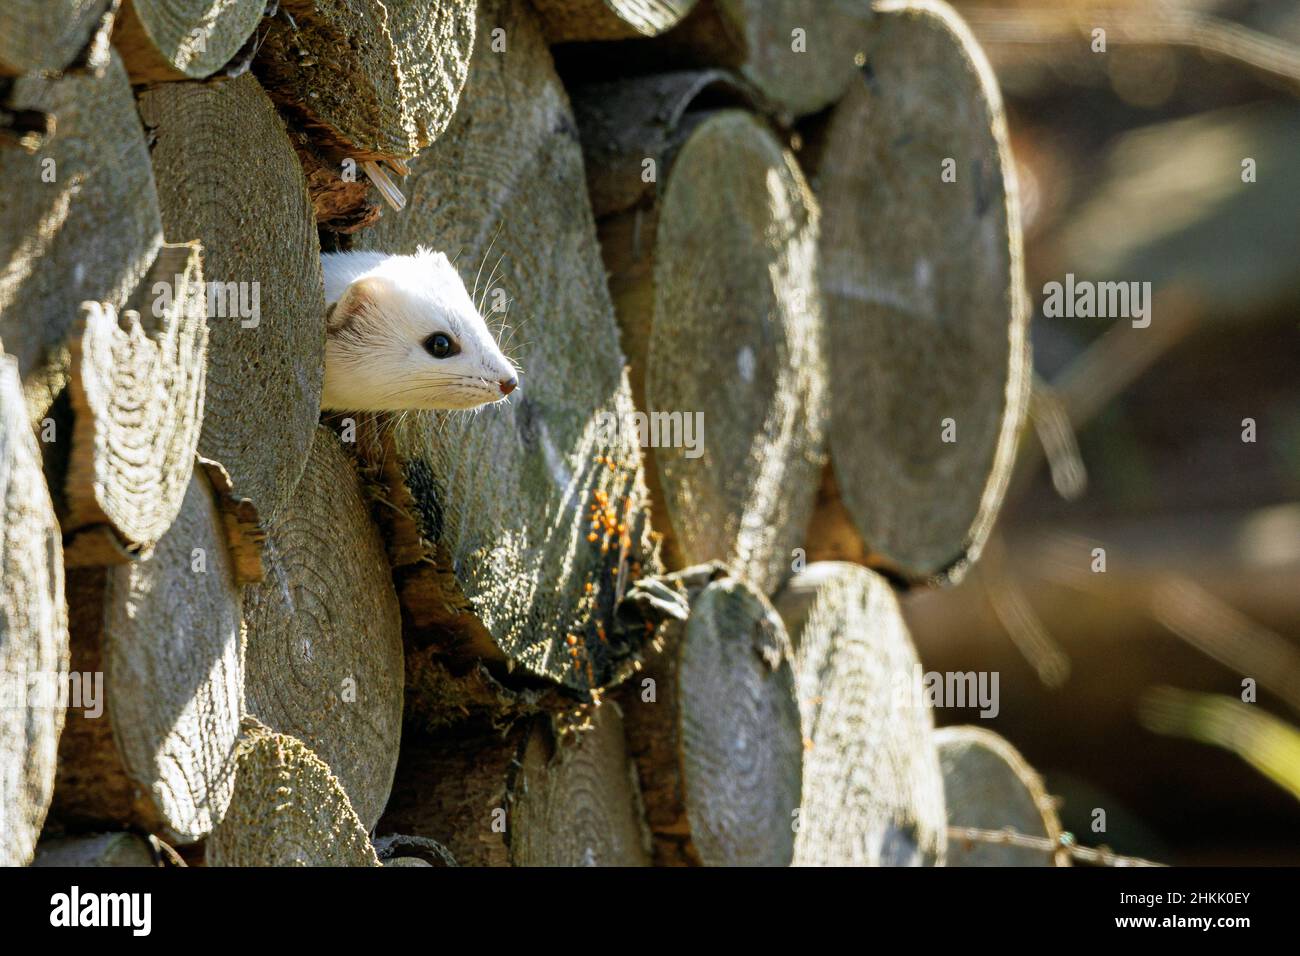 Ermine, Stoat, Short-tailed weasel (Mustela erminea), with winter fur, peering out of a woodpile, Germany, Bavaria Stock Photo